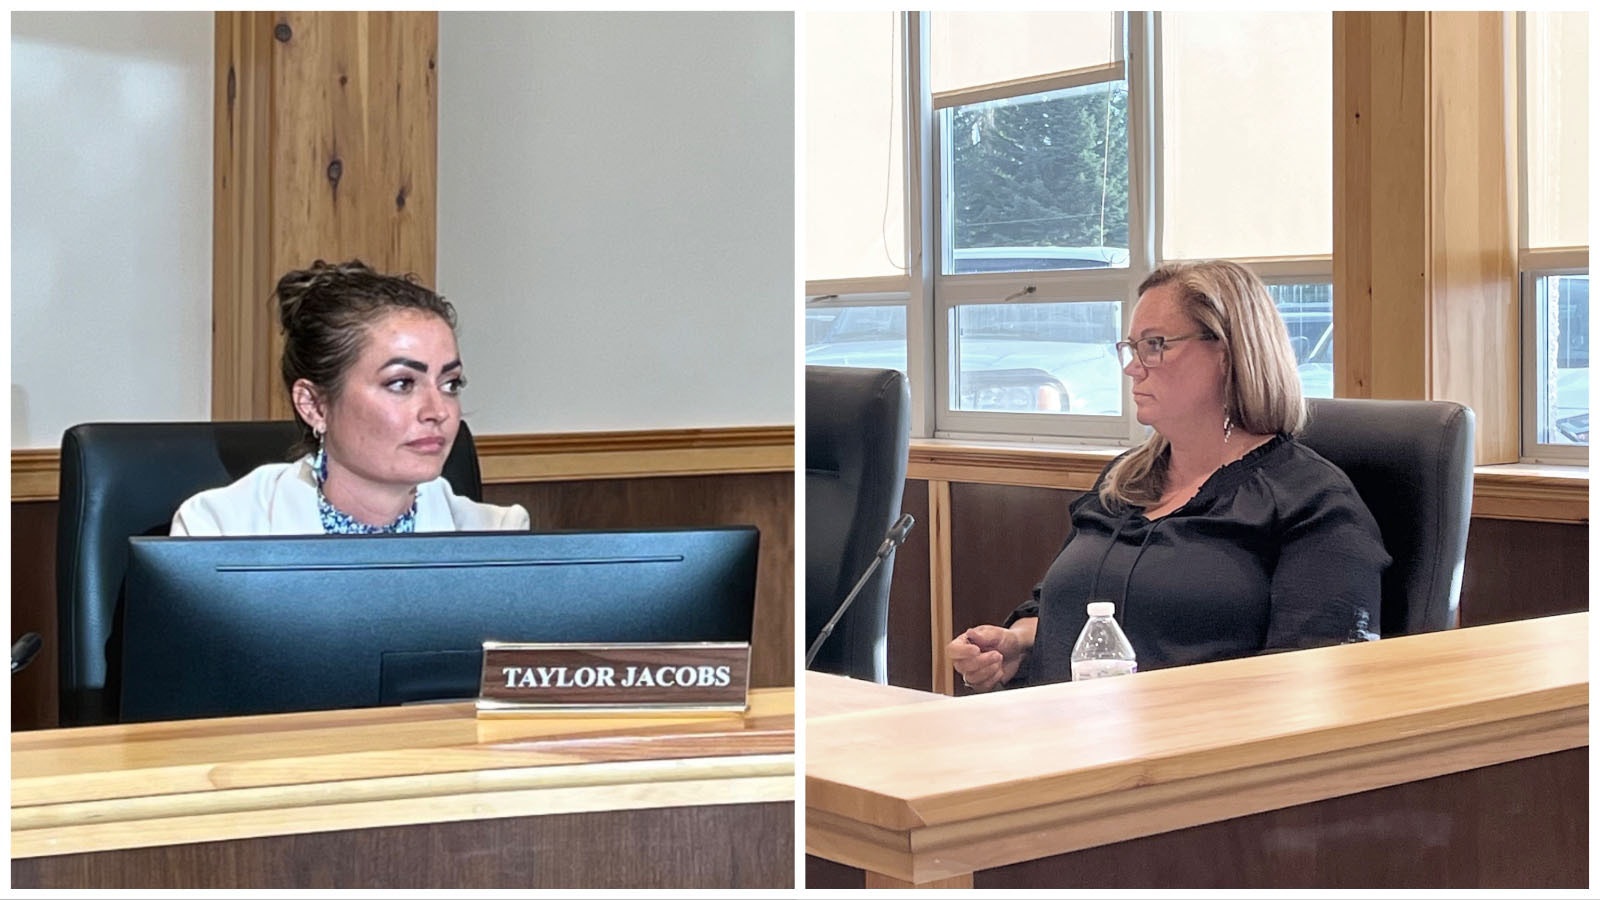 Fremont County School District No. 1 board members Taylor Jacobs, left, and Karen Harms squared off during Tuesday's meeting about a tougher policy for choosing books for school libraries.